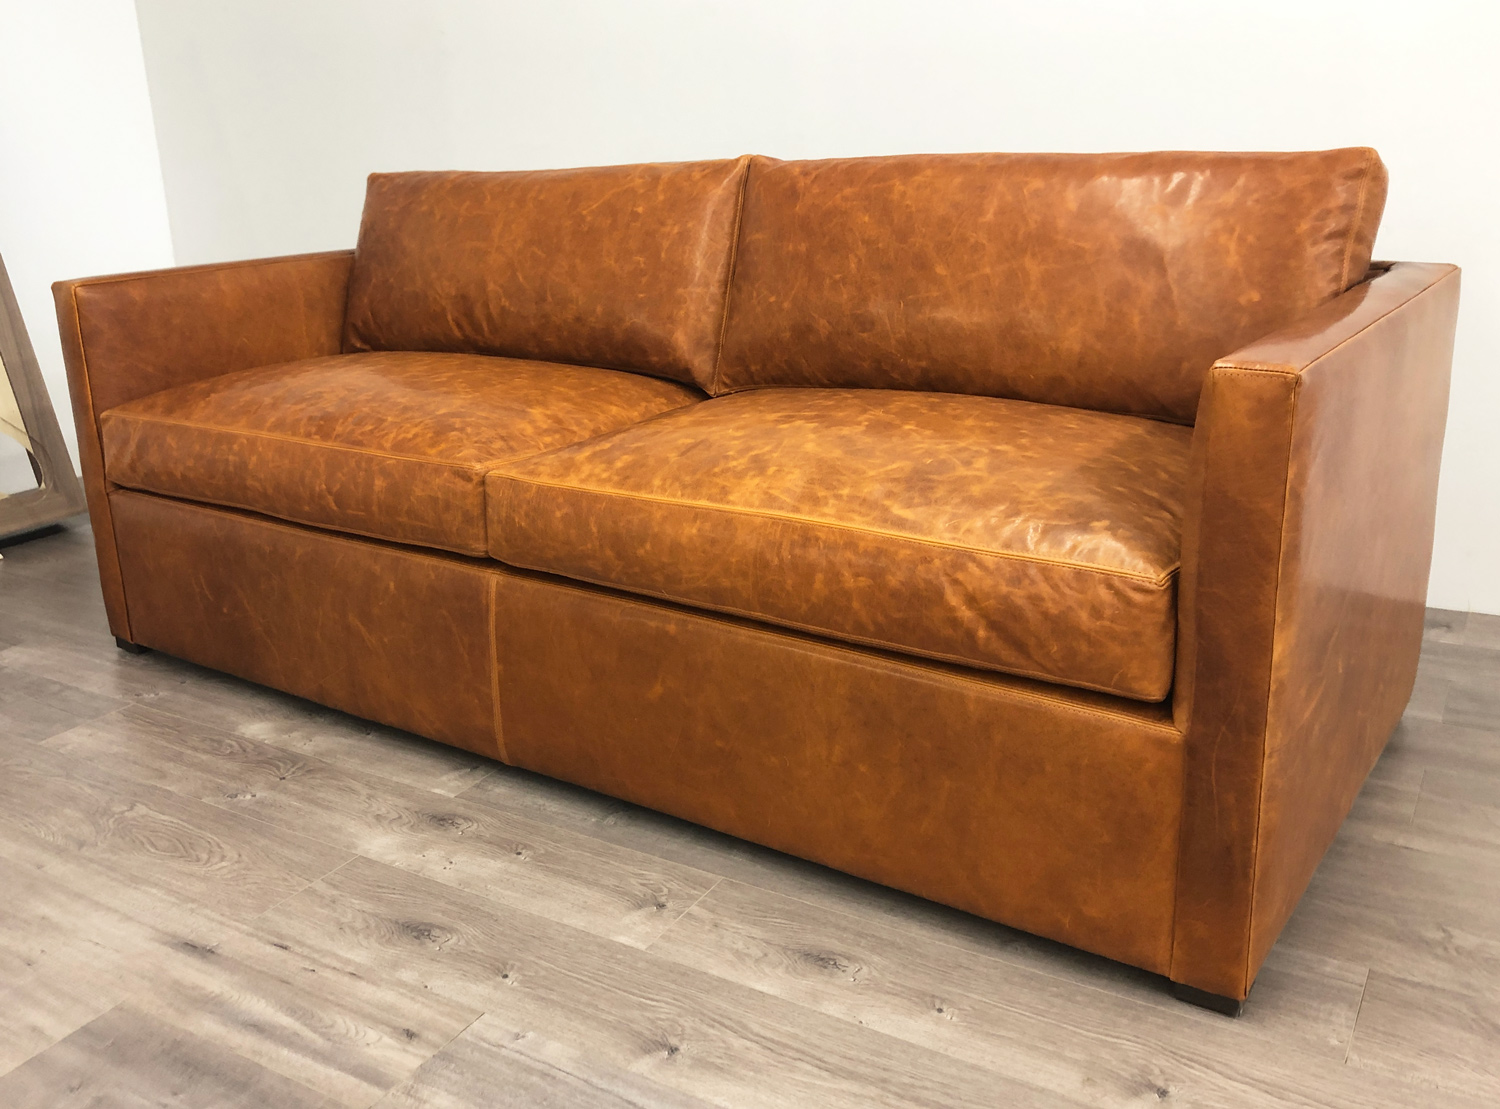 Oscar Leather Sofa in Domaine Bronze Leather - front angle view